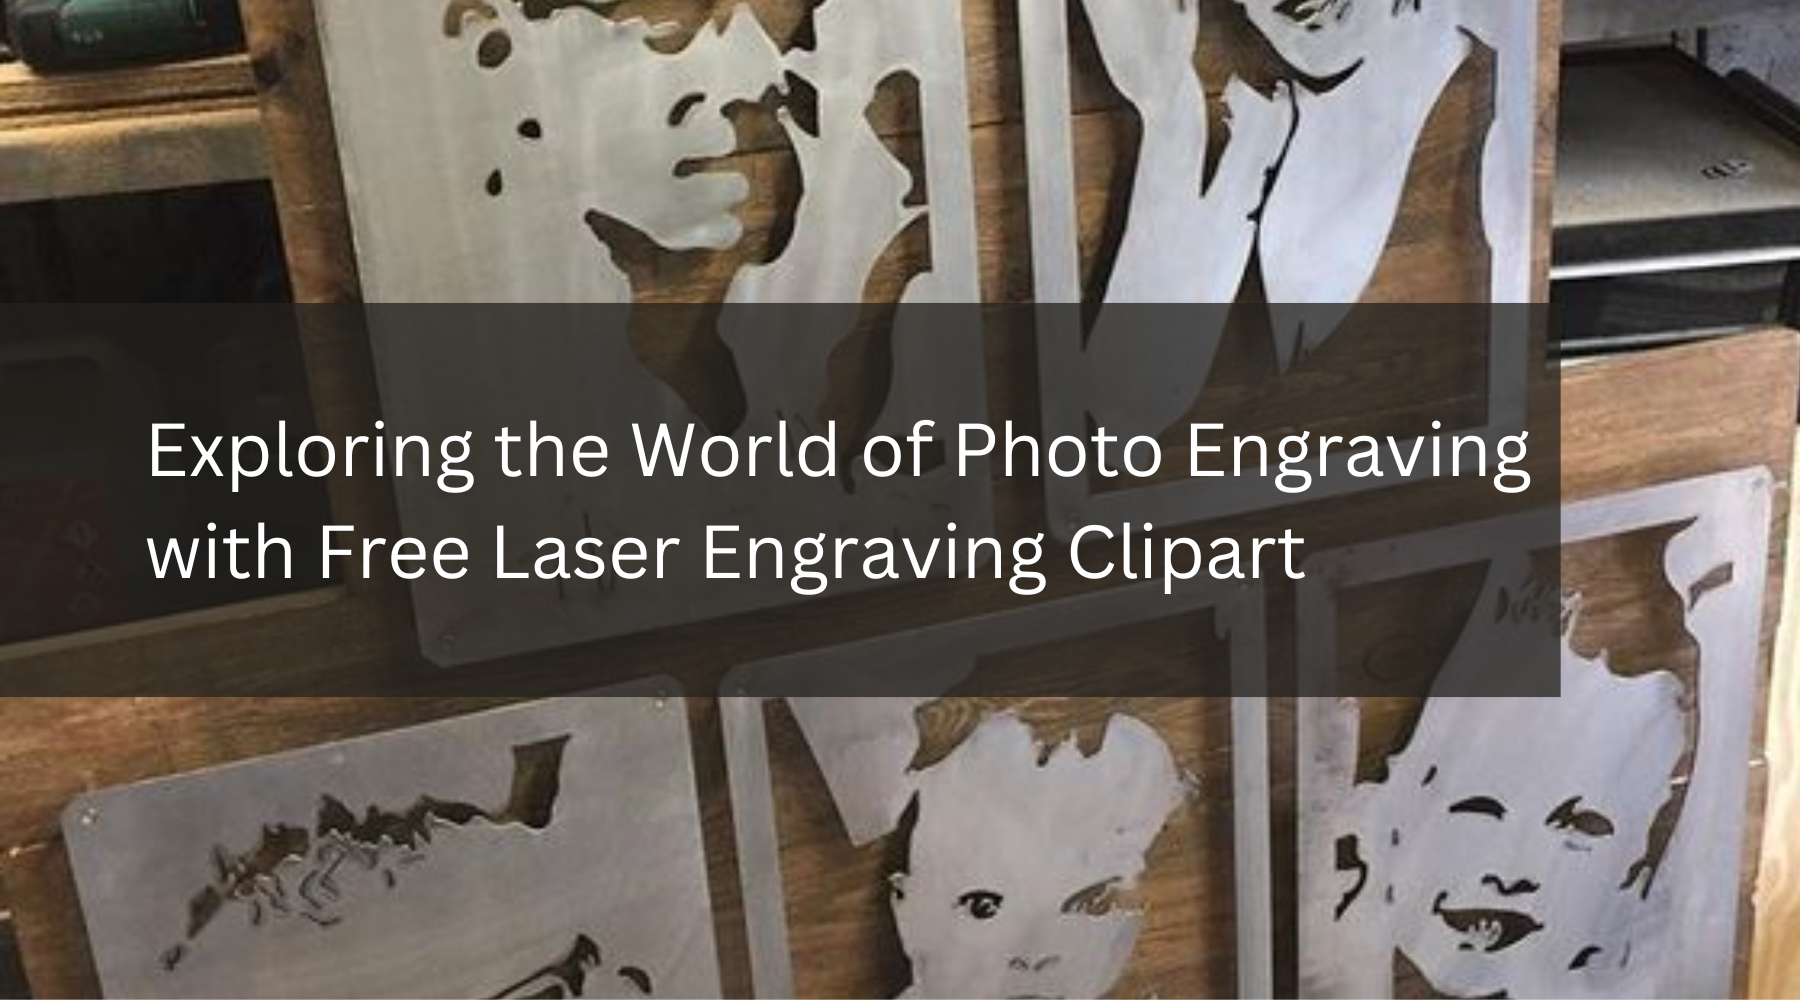 Exploring the World of Photo Engraving with Free Laser Engraving Clipart